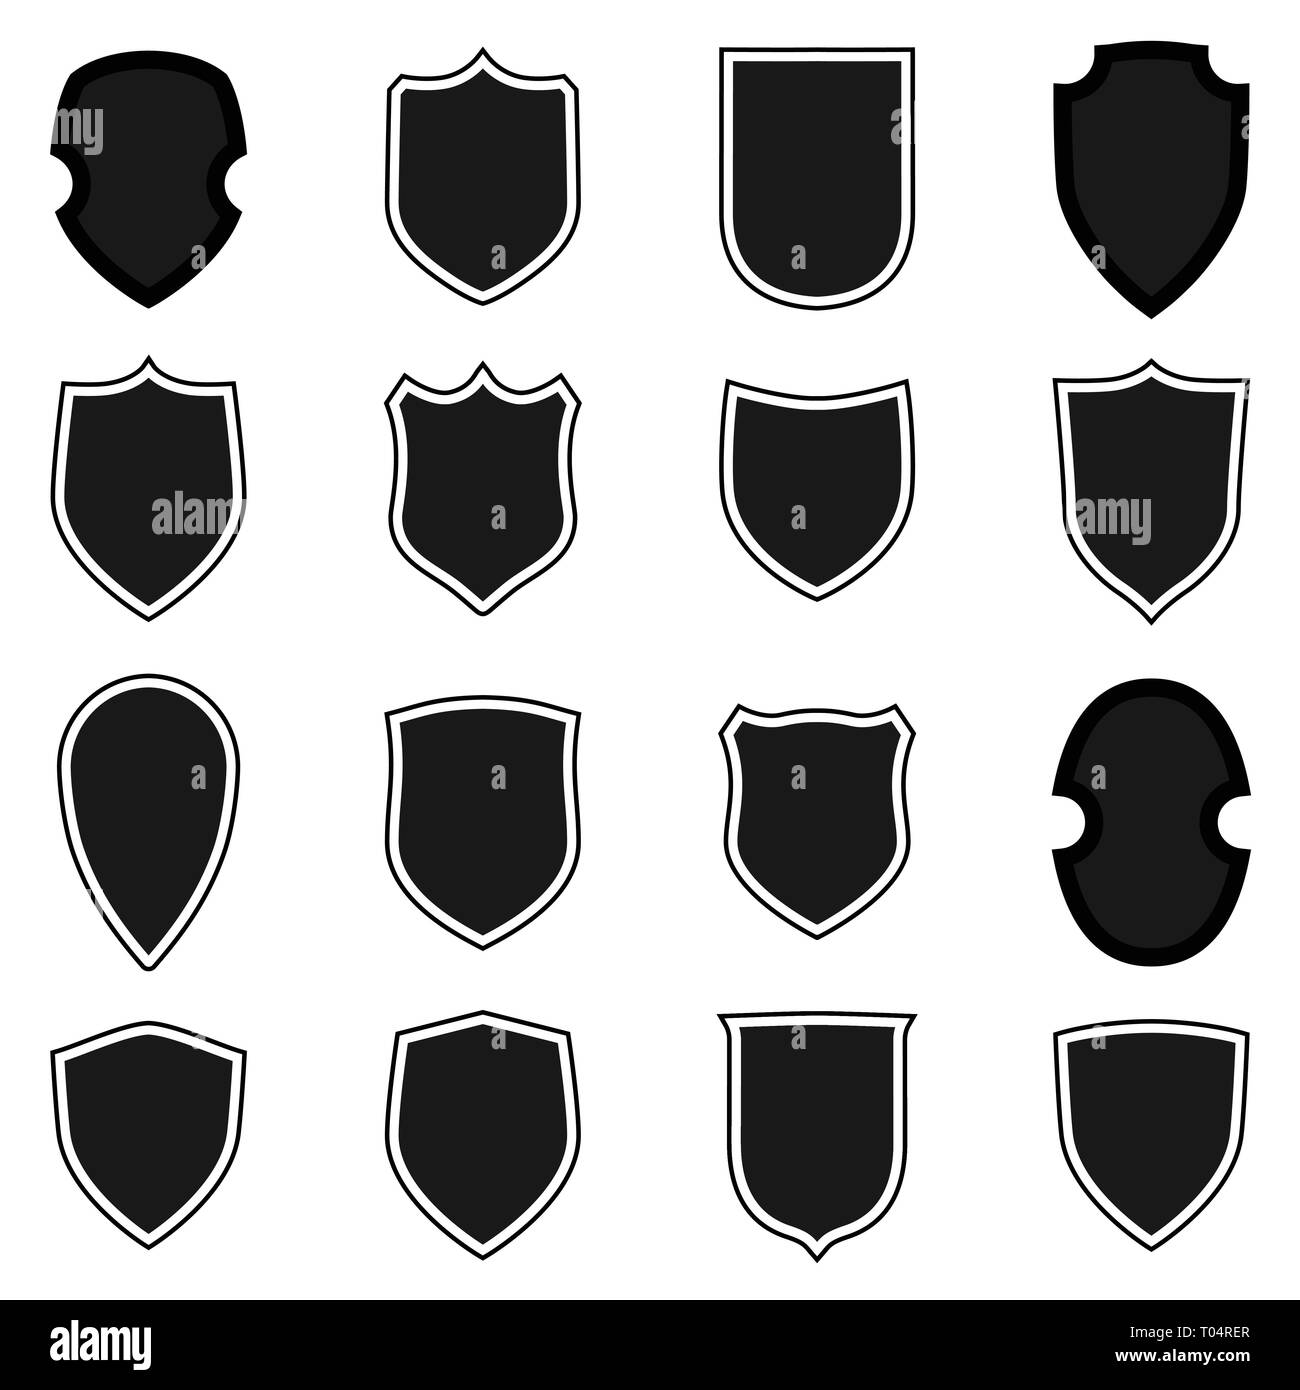 Shield Shape High Resolution Stock Photography and Images - Alamy